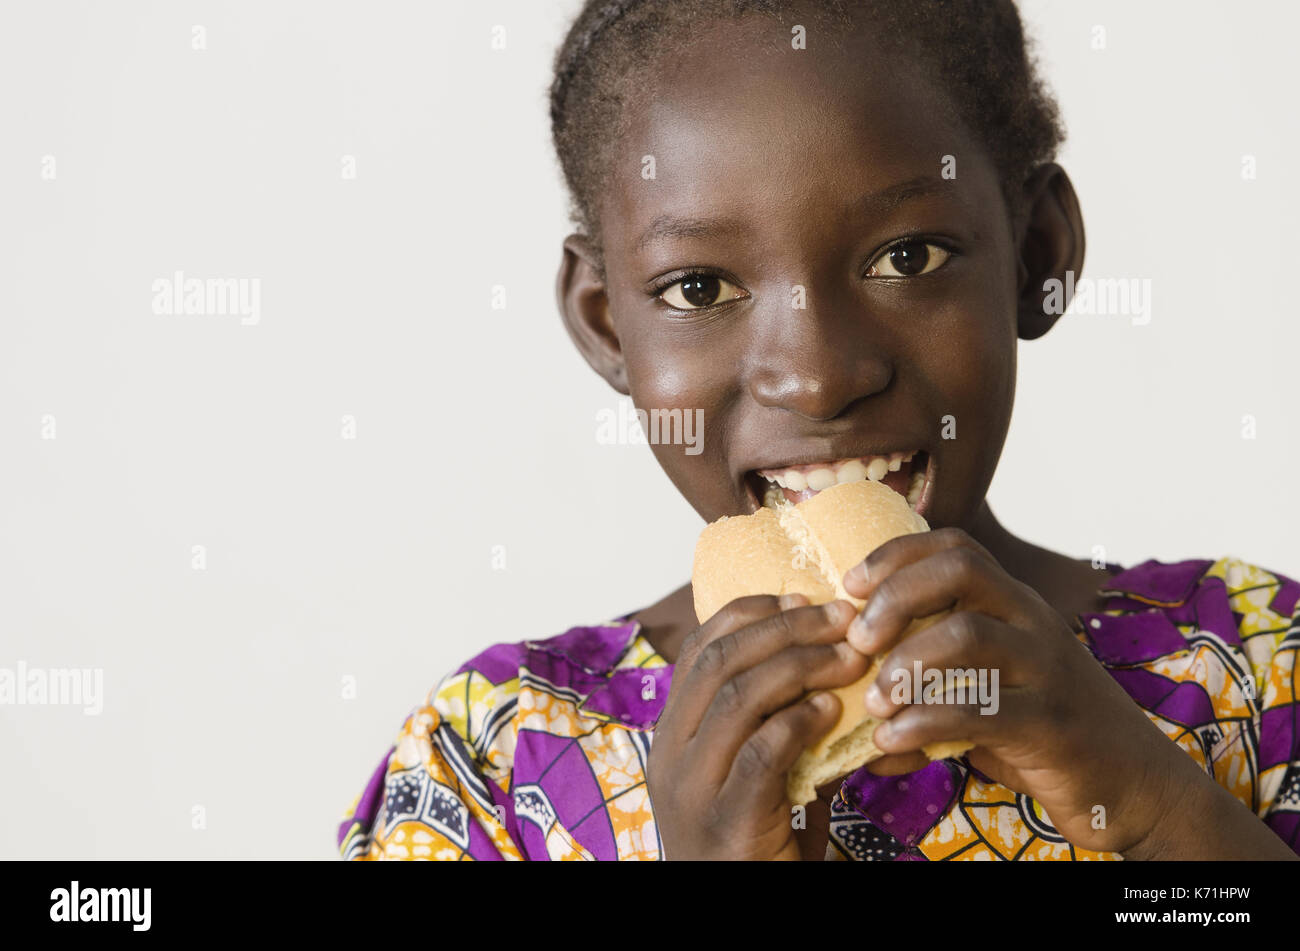 https://c8.alamy.com/comp/K71HPW/young-african-girl-eating-some-bread-isolated-on-white-K71HPW.jpg